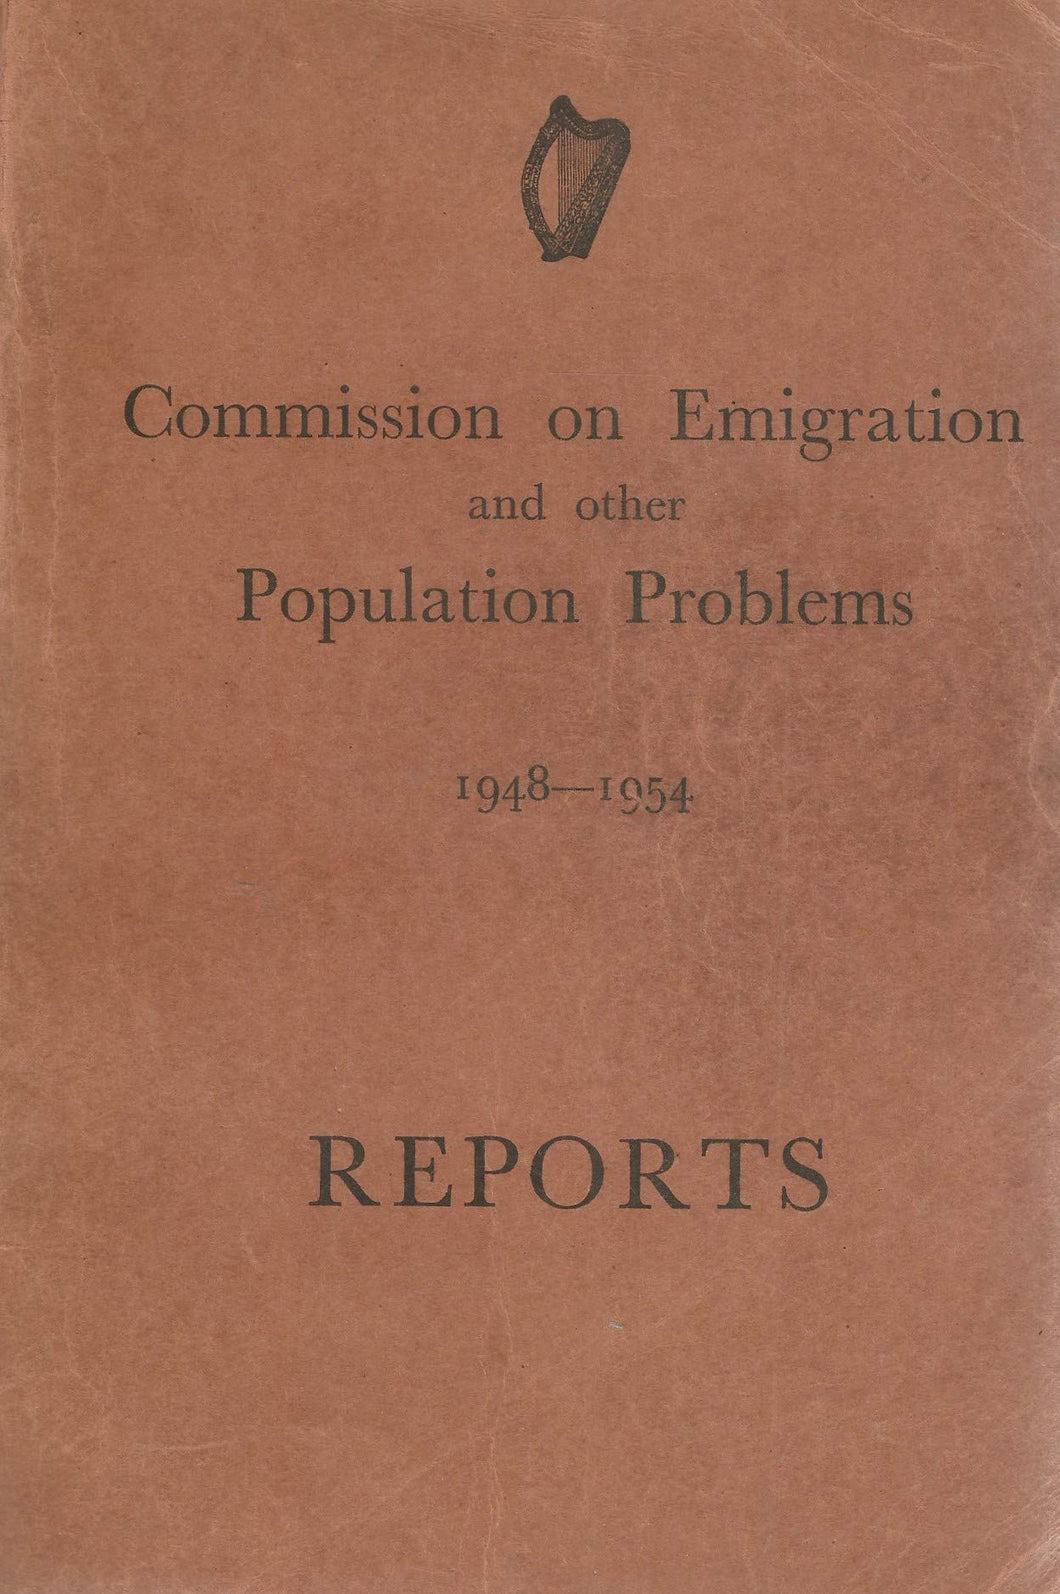 Commission on Emigration and other Population Problems, 1948-1954. Reports